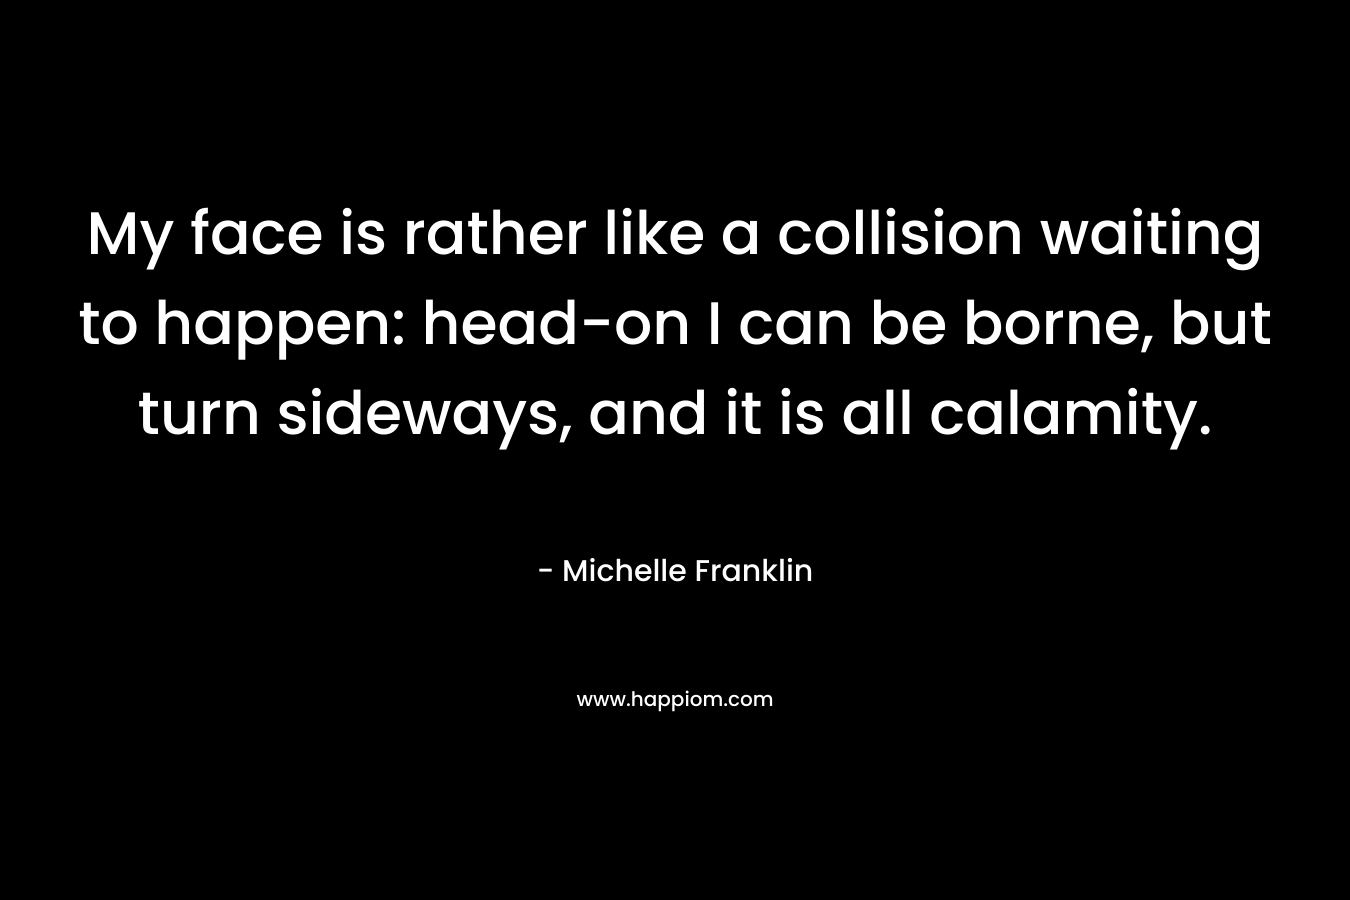 My face is rather like a collision waiting to happen: head-on I can be borne, but turn sideways, and it is all calamity.